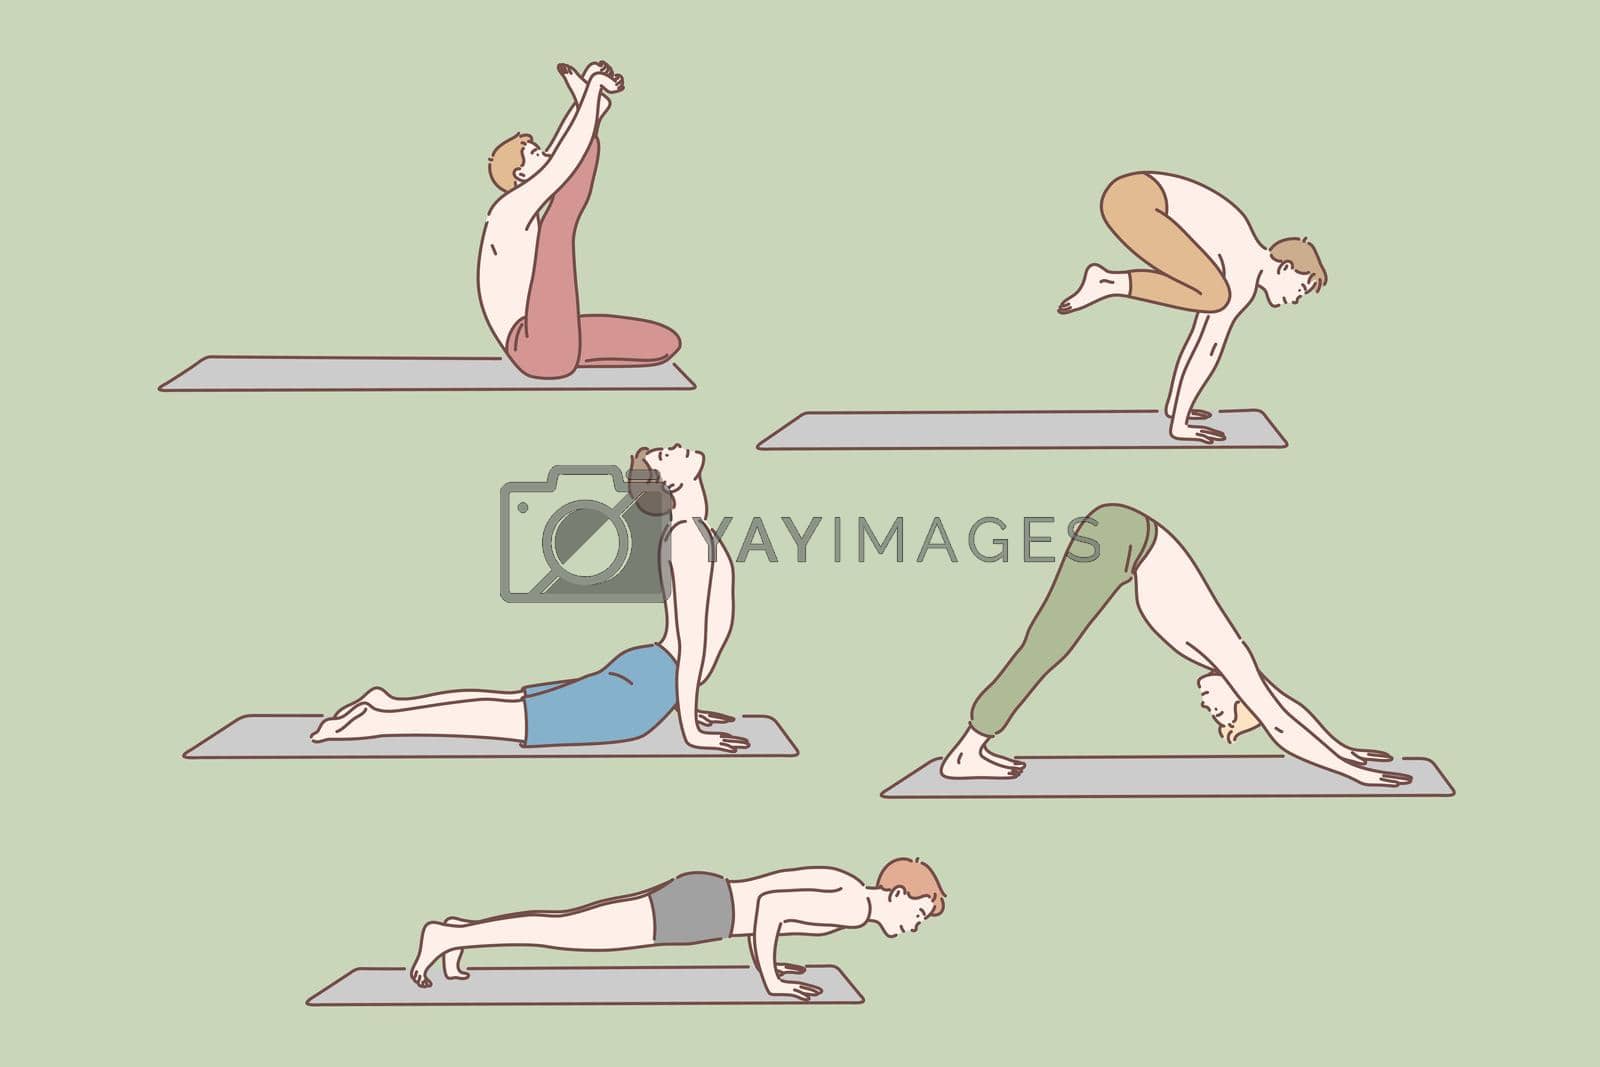 Healthcare, yoga exercises set concept. Group of young men do yoga exercises. Flexible boys care about their health, using different postures or asanas to reach harmony. Simple flat vector